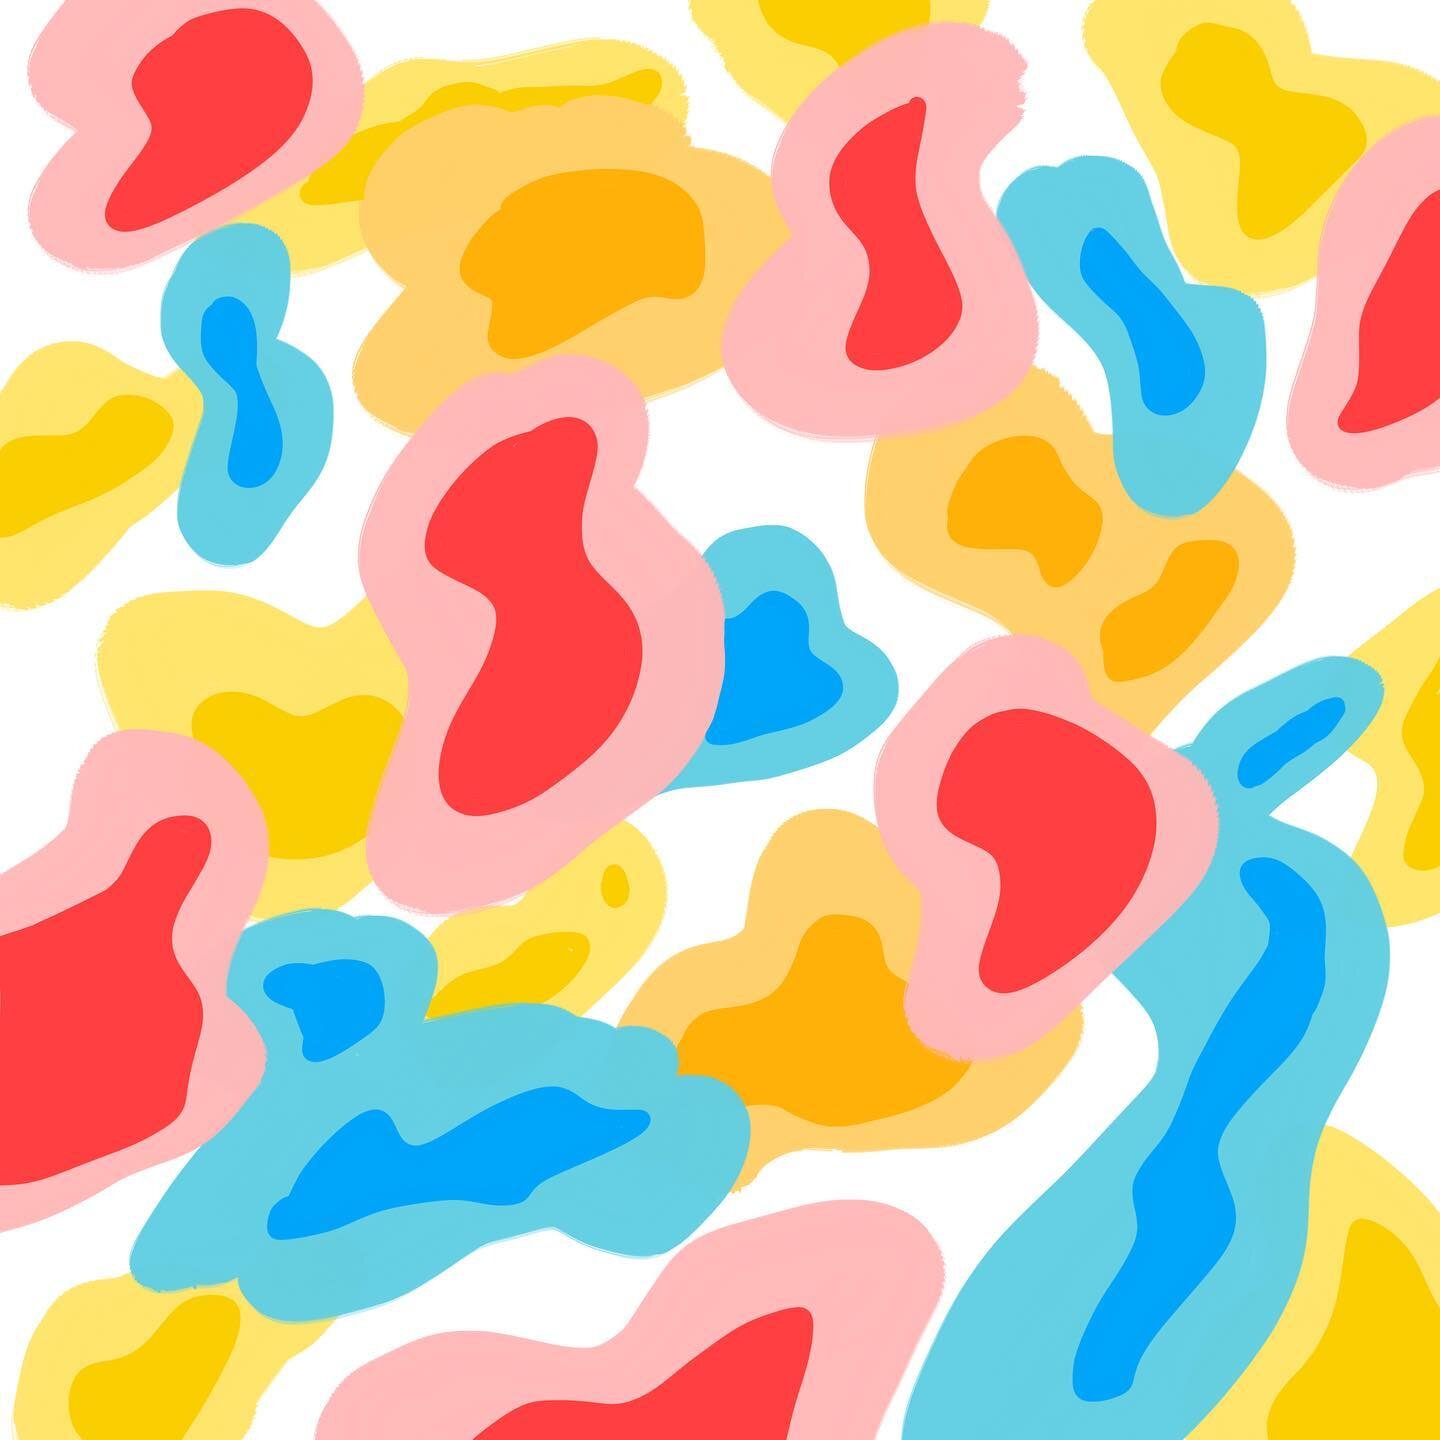 Sometimes inspiration hits~ Quick doodle pattern I drew. 🌟🌺✨ I was inspired by seeing a few color palettes, and just wanted to freely create something. I love the ability to make! 🥰